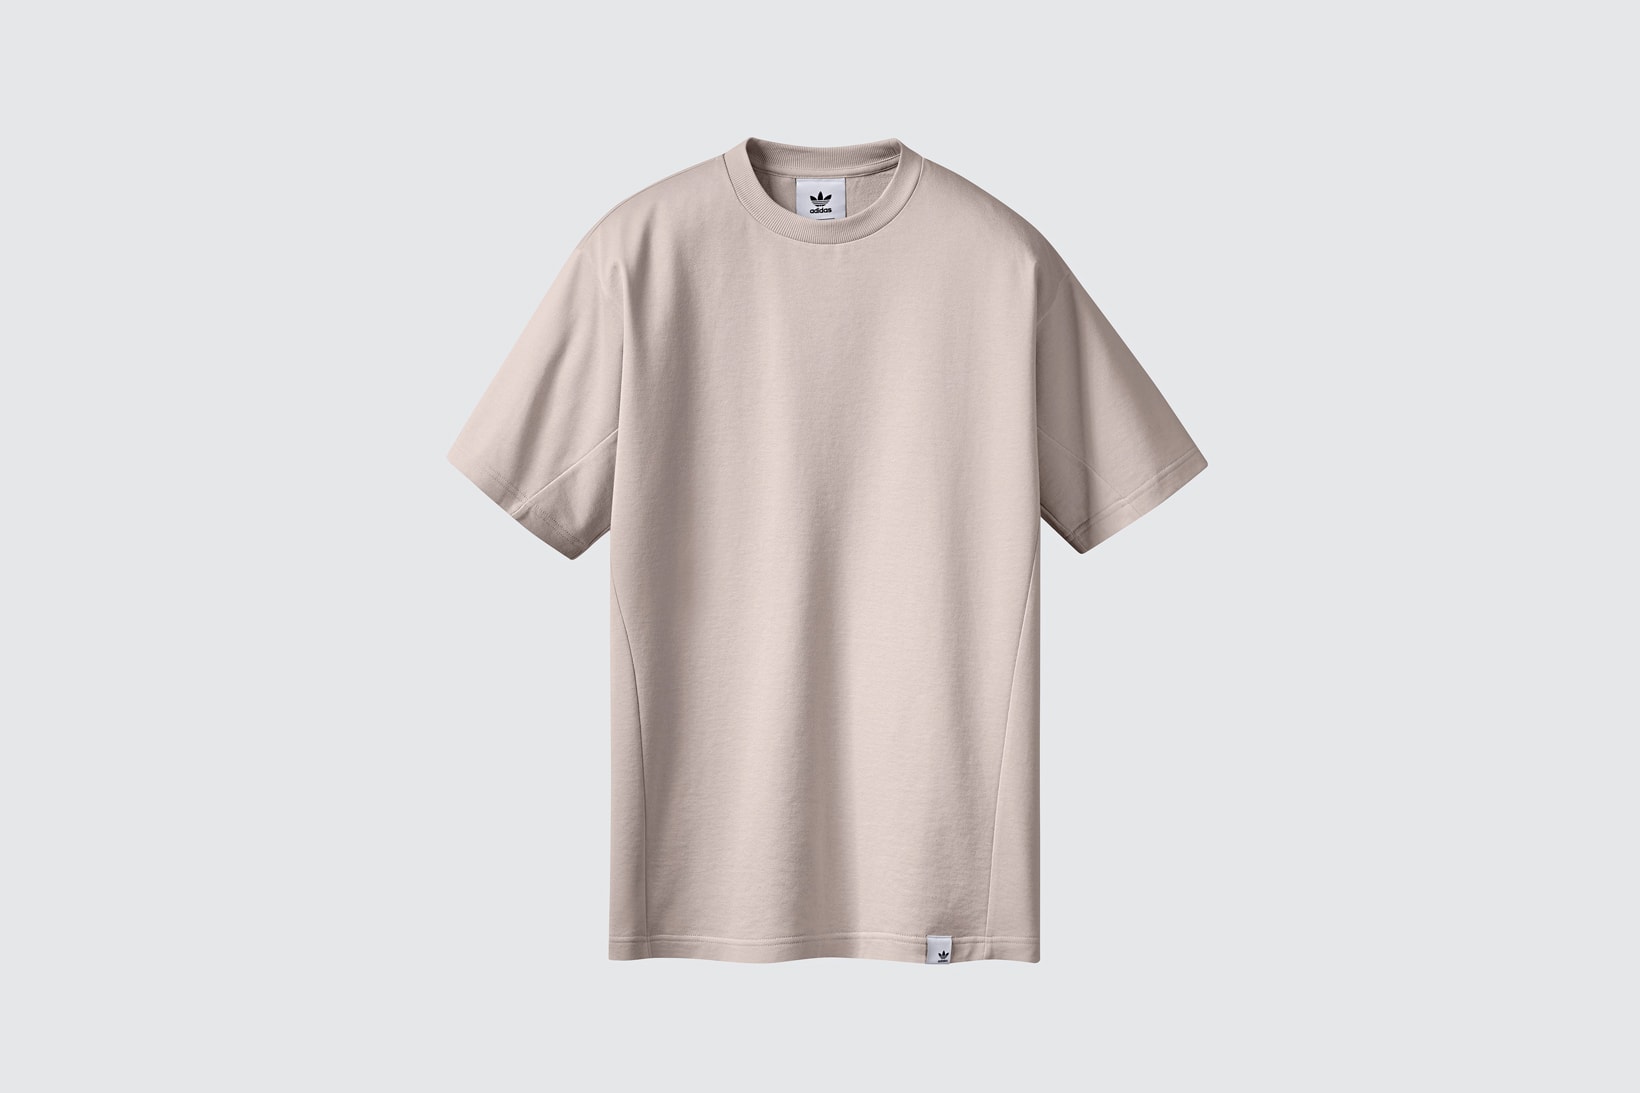 adidas Originals x Oyster Holdings Spring/Summer 2018 Capsule Collection Panel Constructed T-Shirt Tan